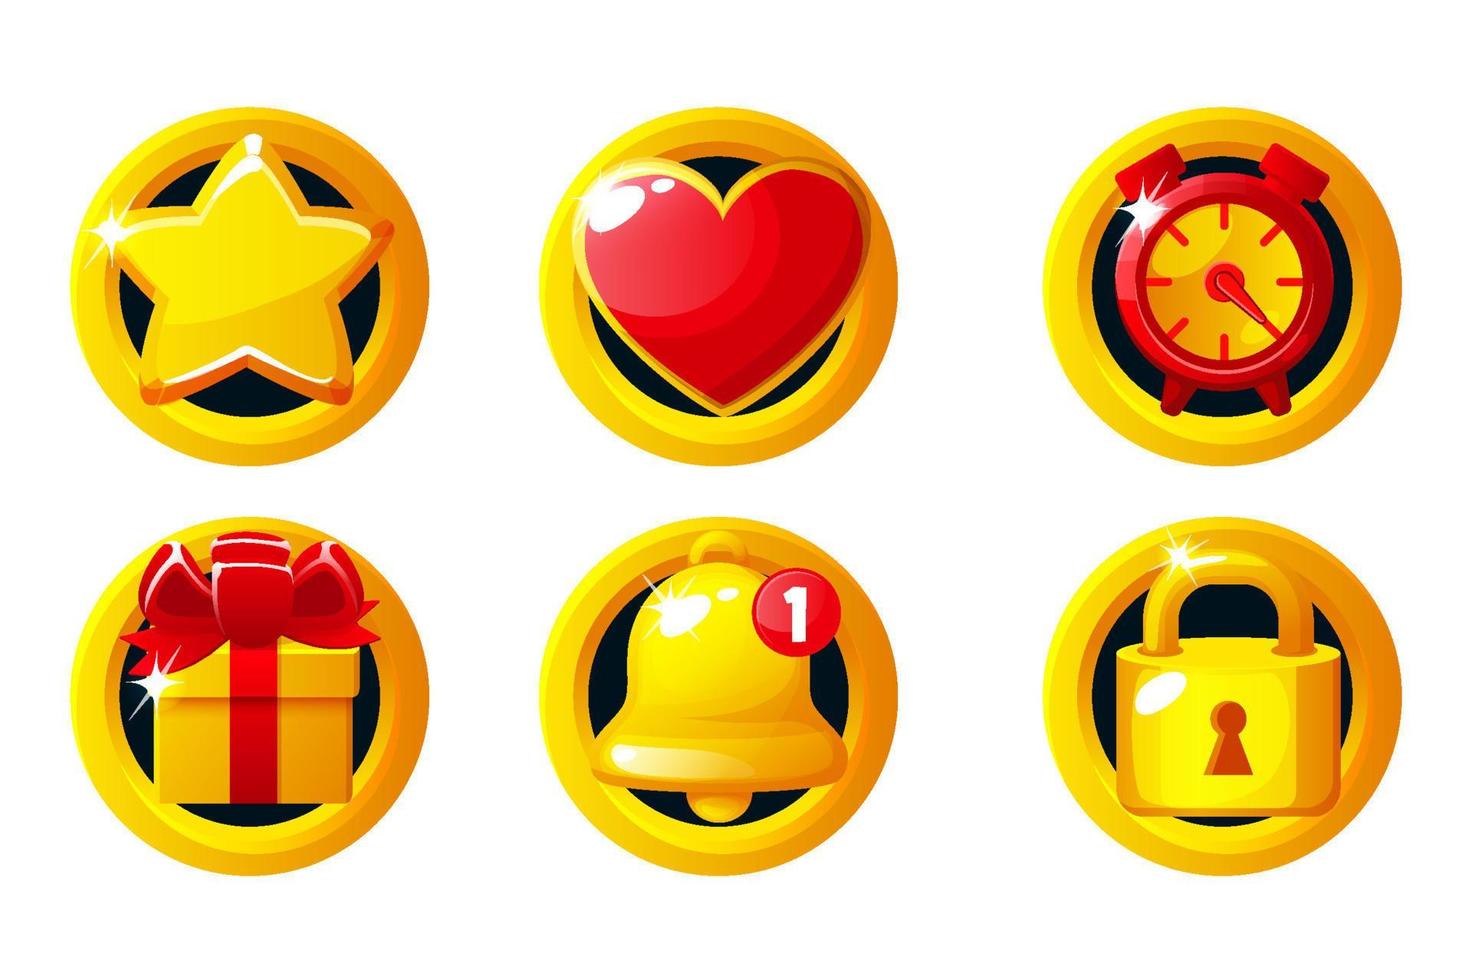 Set of golden game icons- star, heart, clock, gift box, bell and lock. Game App Icons vector